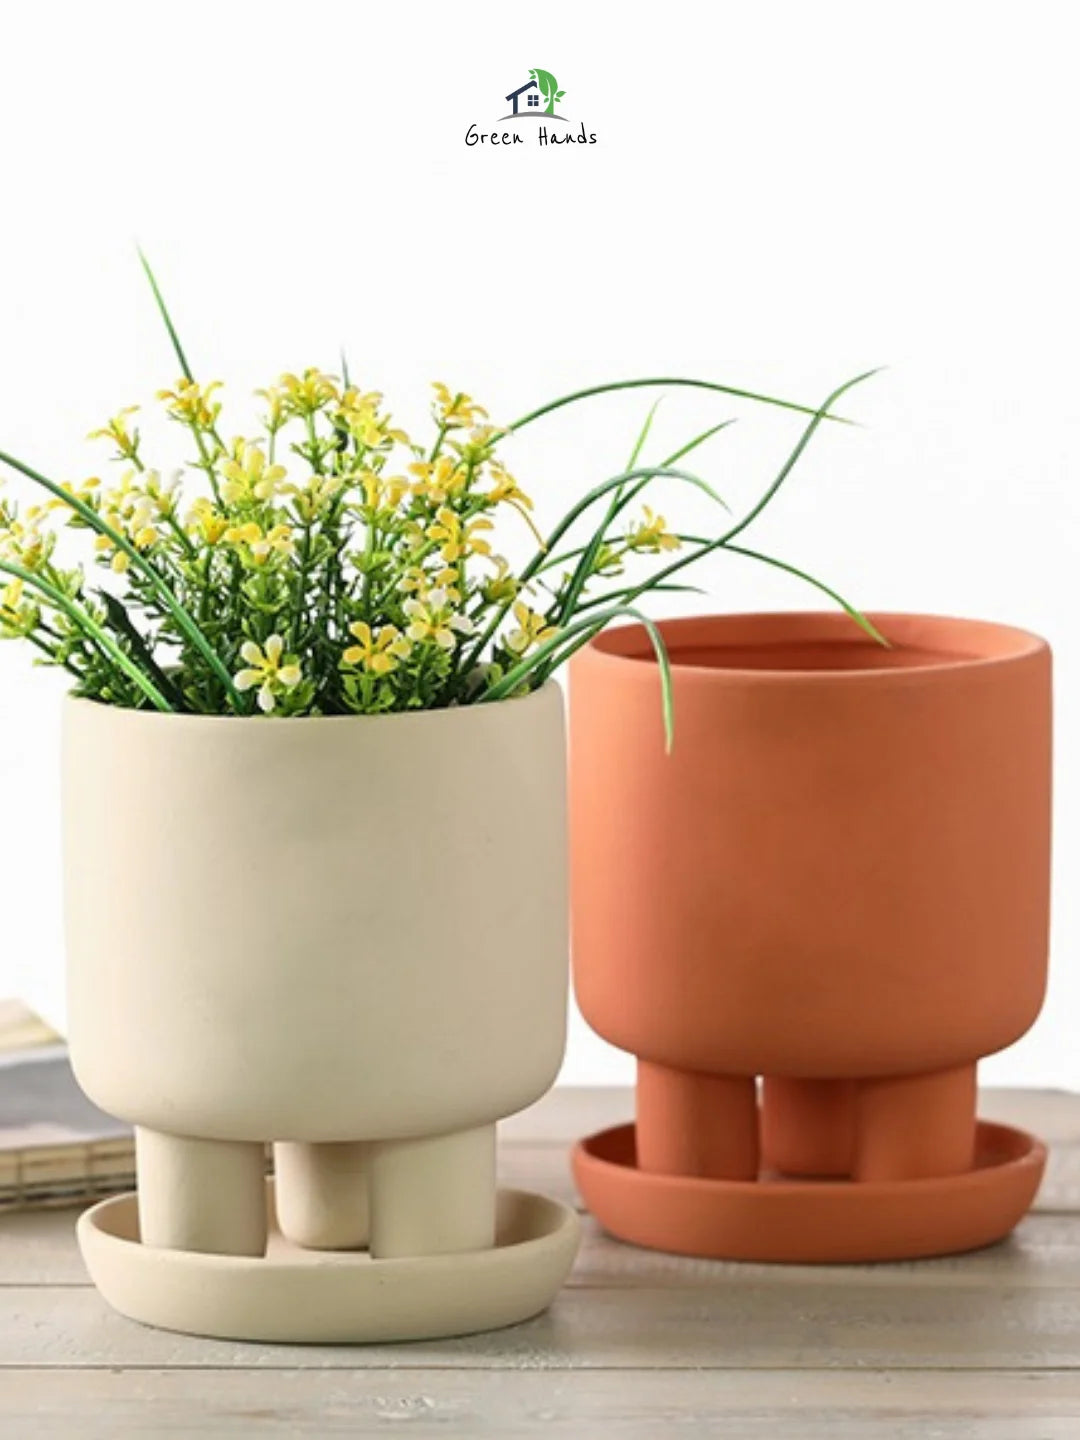 Tripod Pot: Hand-Cast Terracotta Planters for a Sustainable, Stylish Home